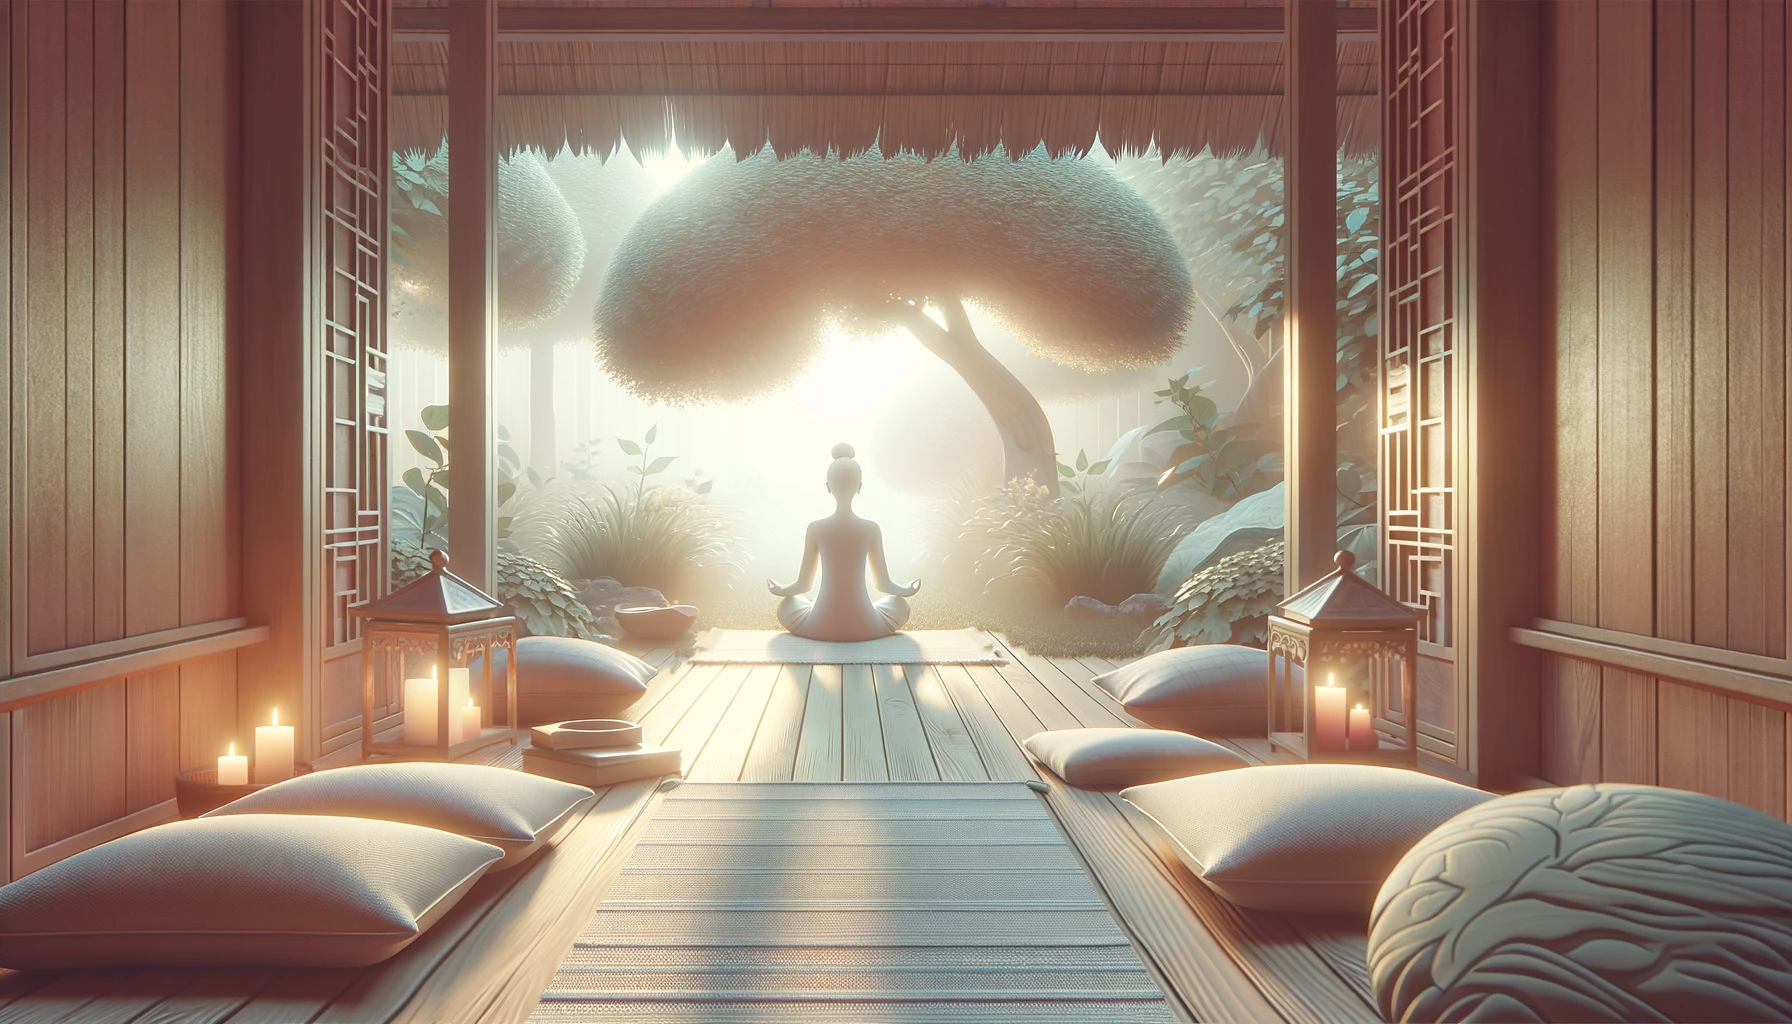 ·E 2023 12 13 05.55.45   Featured blog image for an article on the benefits of daily meditation. The image should be serene and calming, depicting a tranquil meditation settin.png